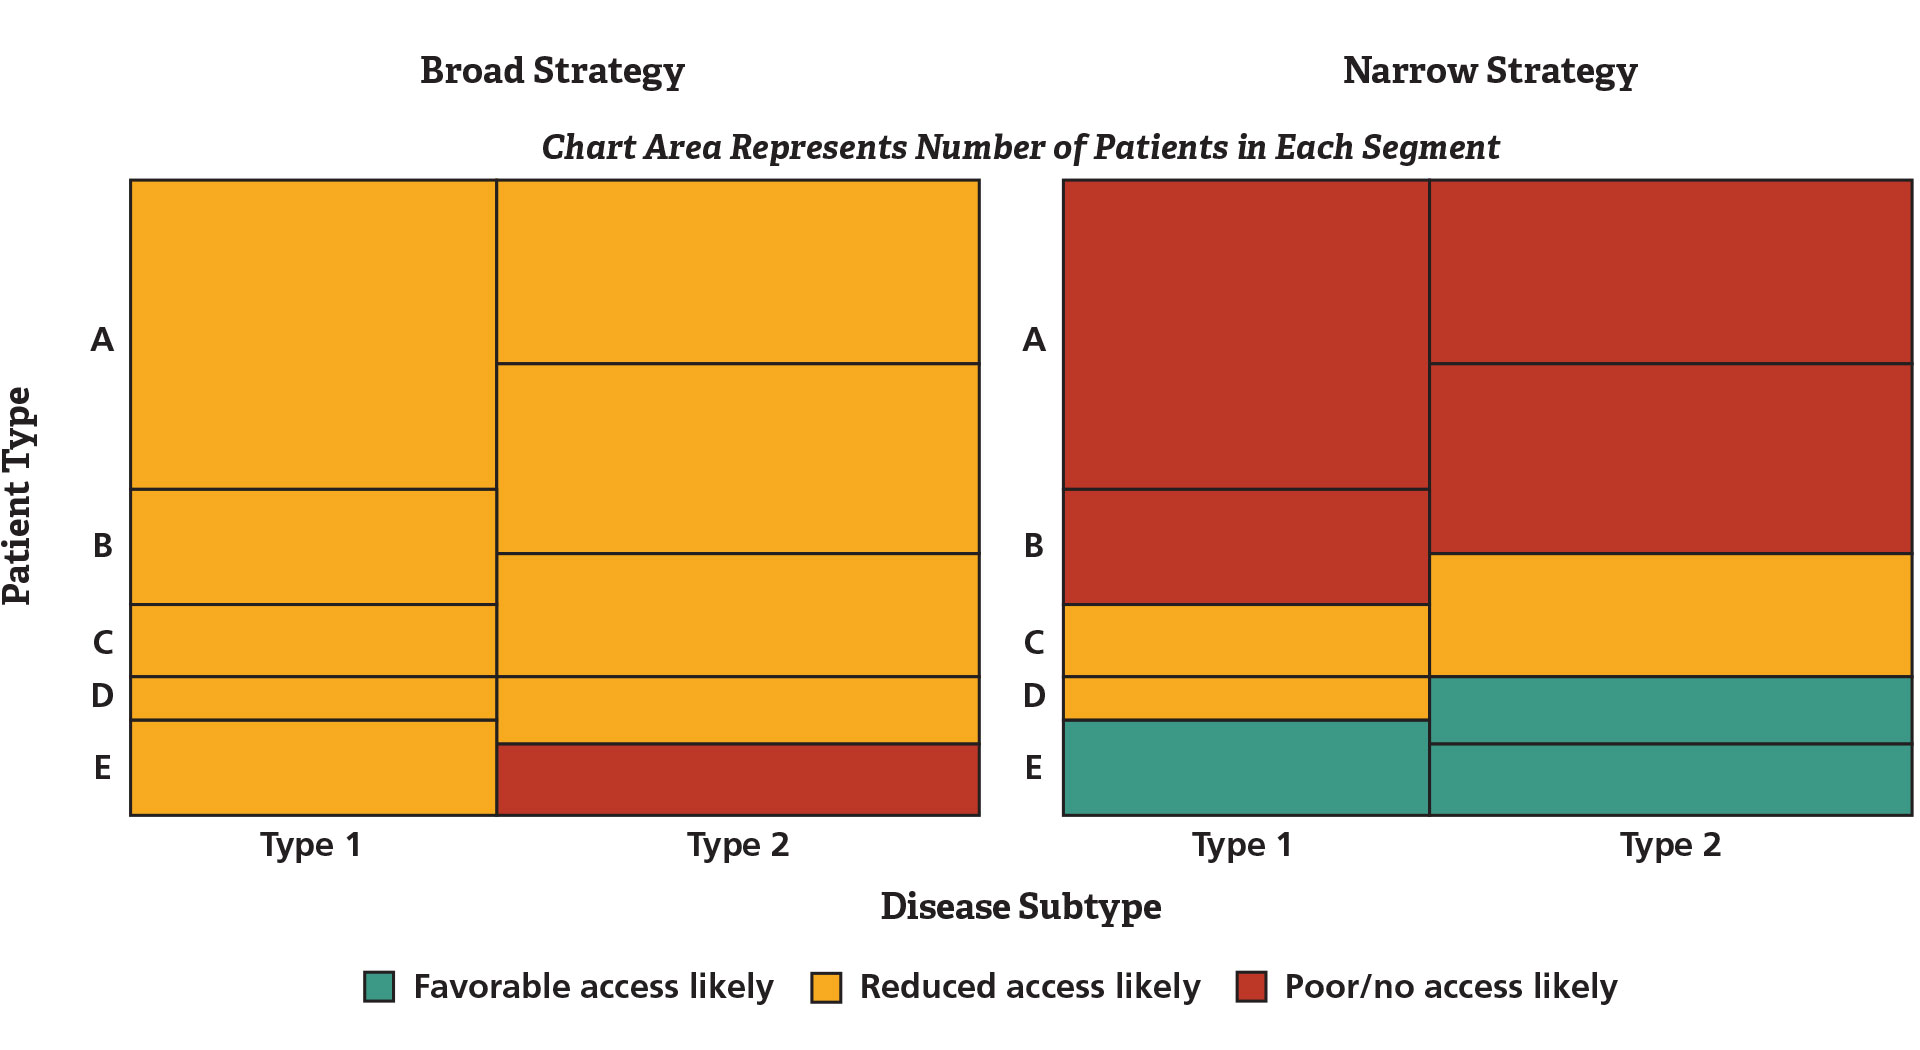 Figure 1. Strength of Value Proposition by Patient Segment and Disease Subtype